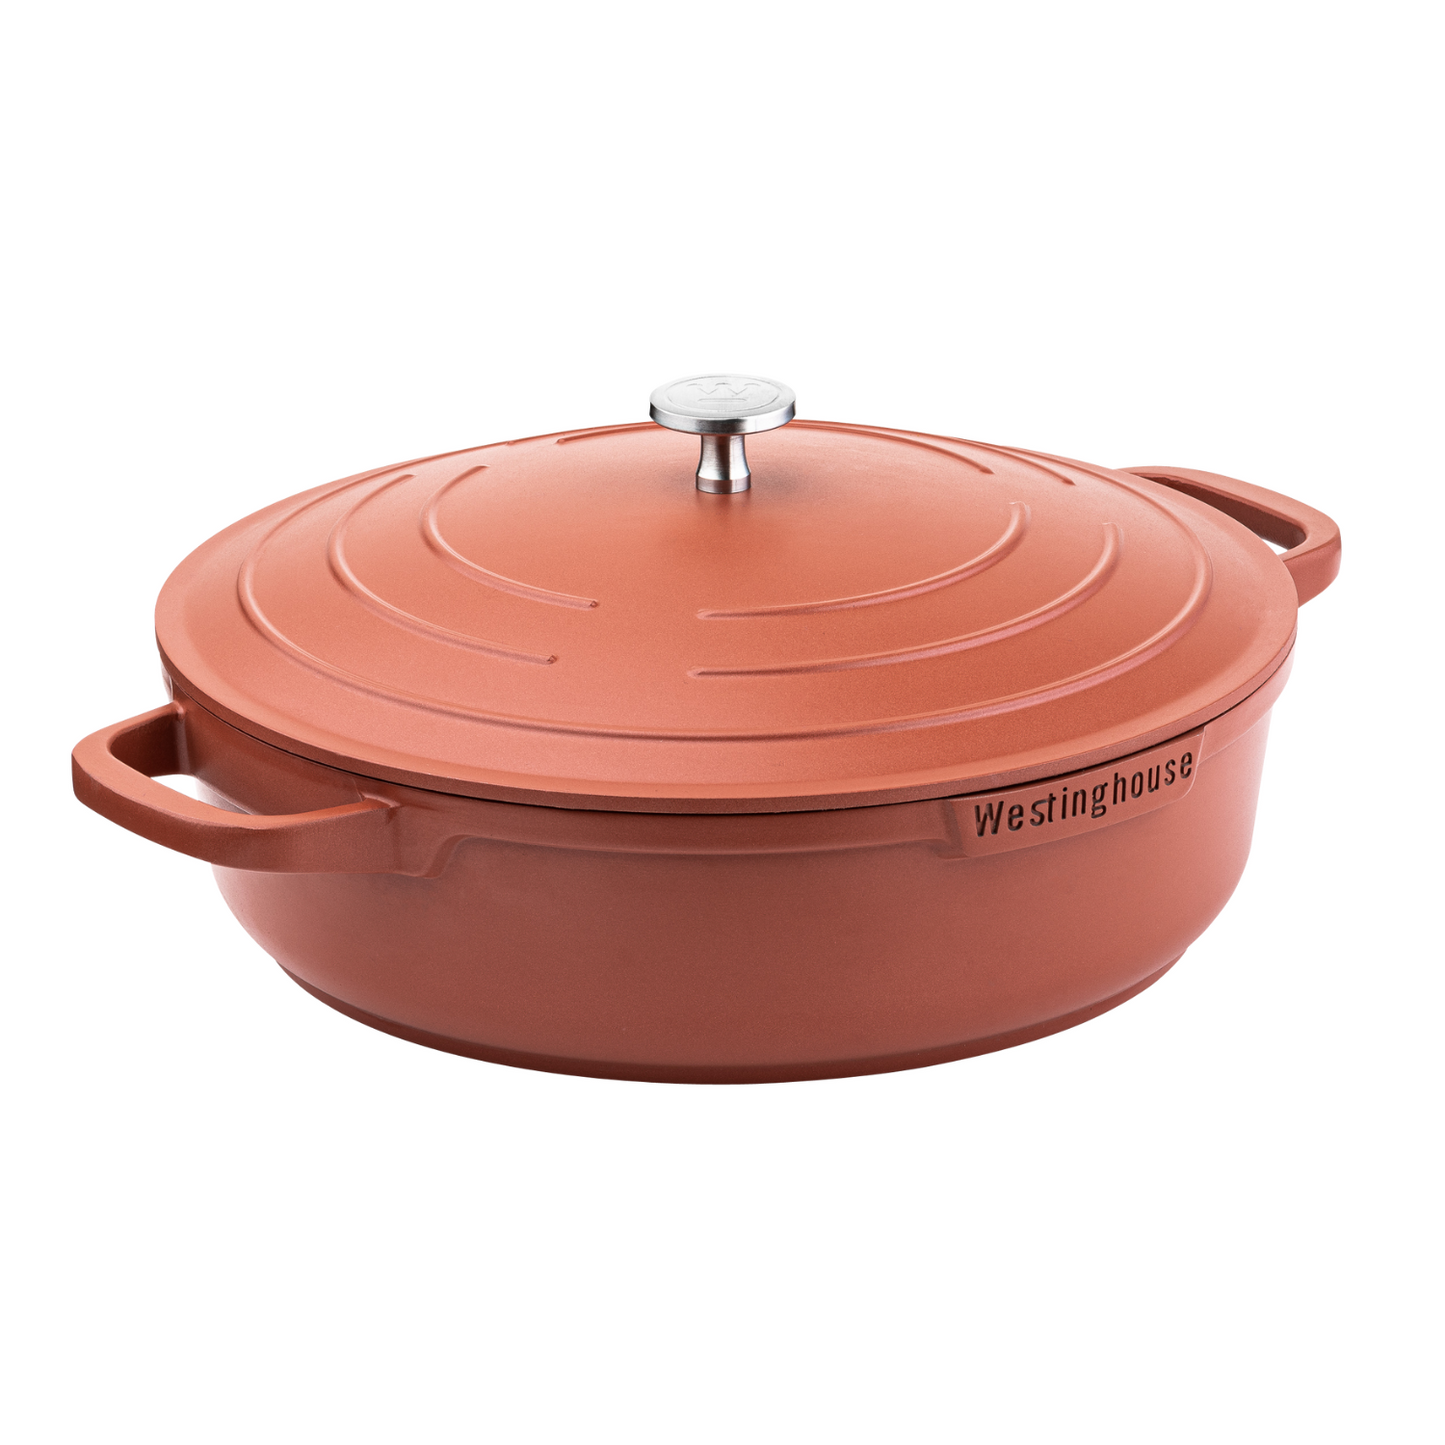 11" Low Casserole with Lid - (28cm) - Performance Series